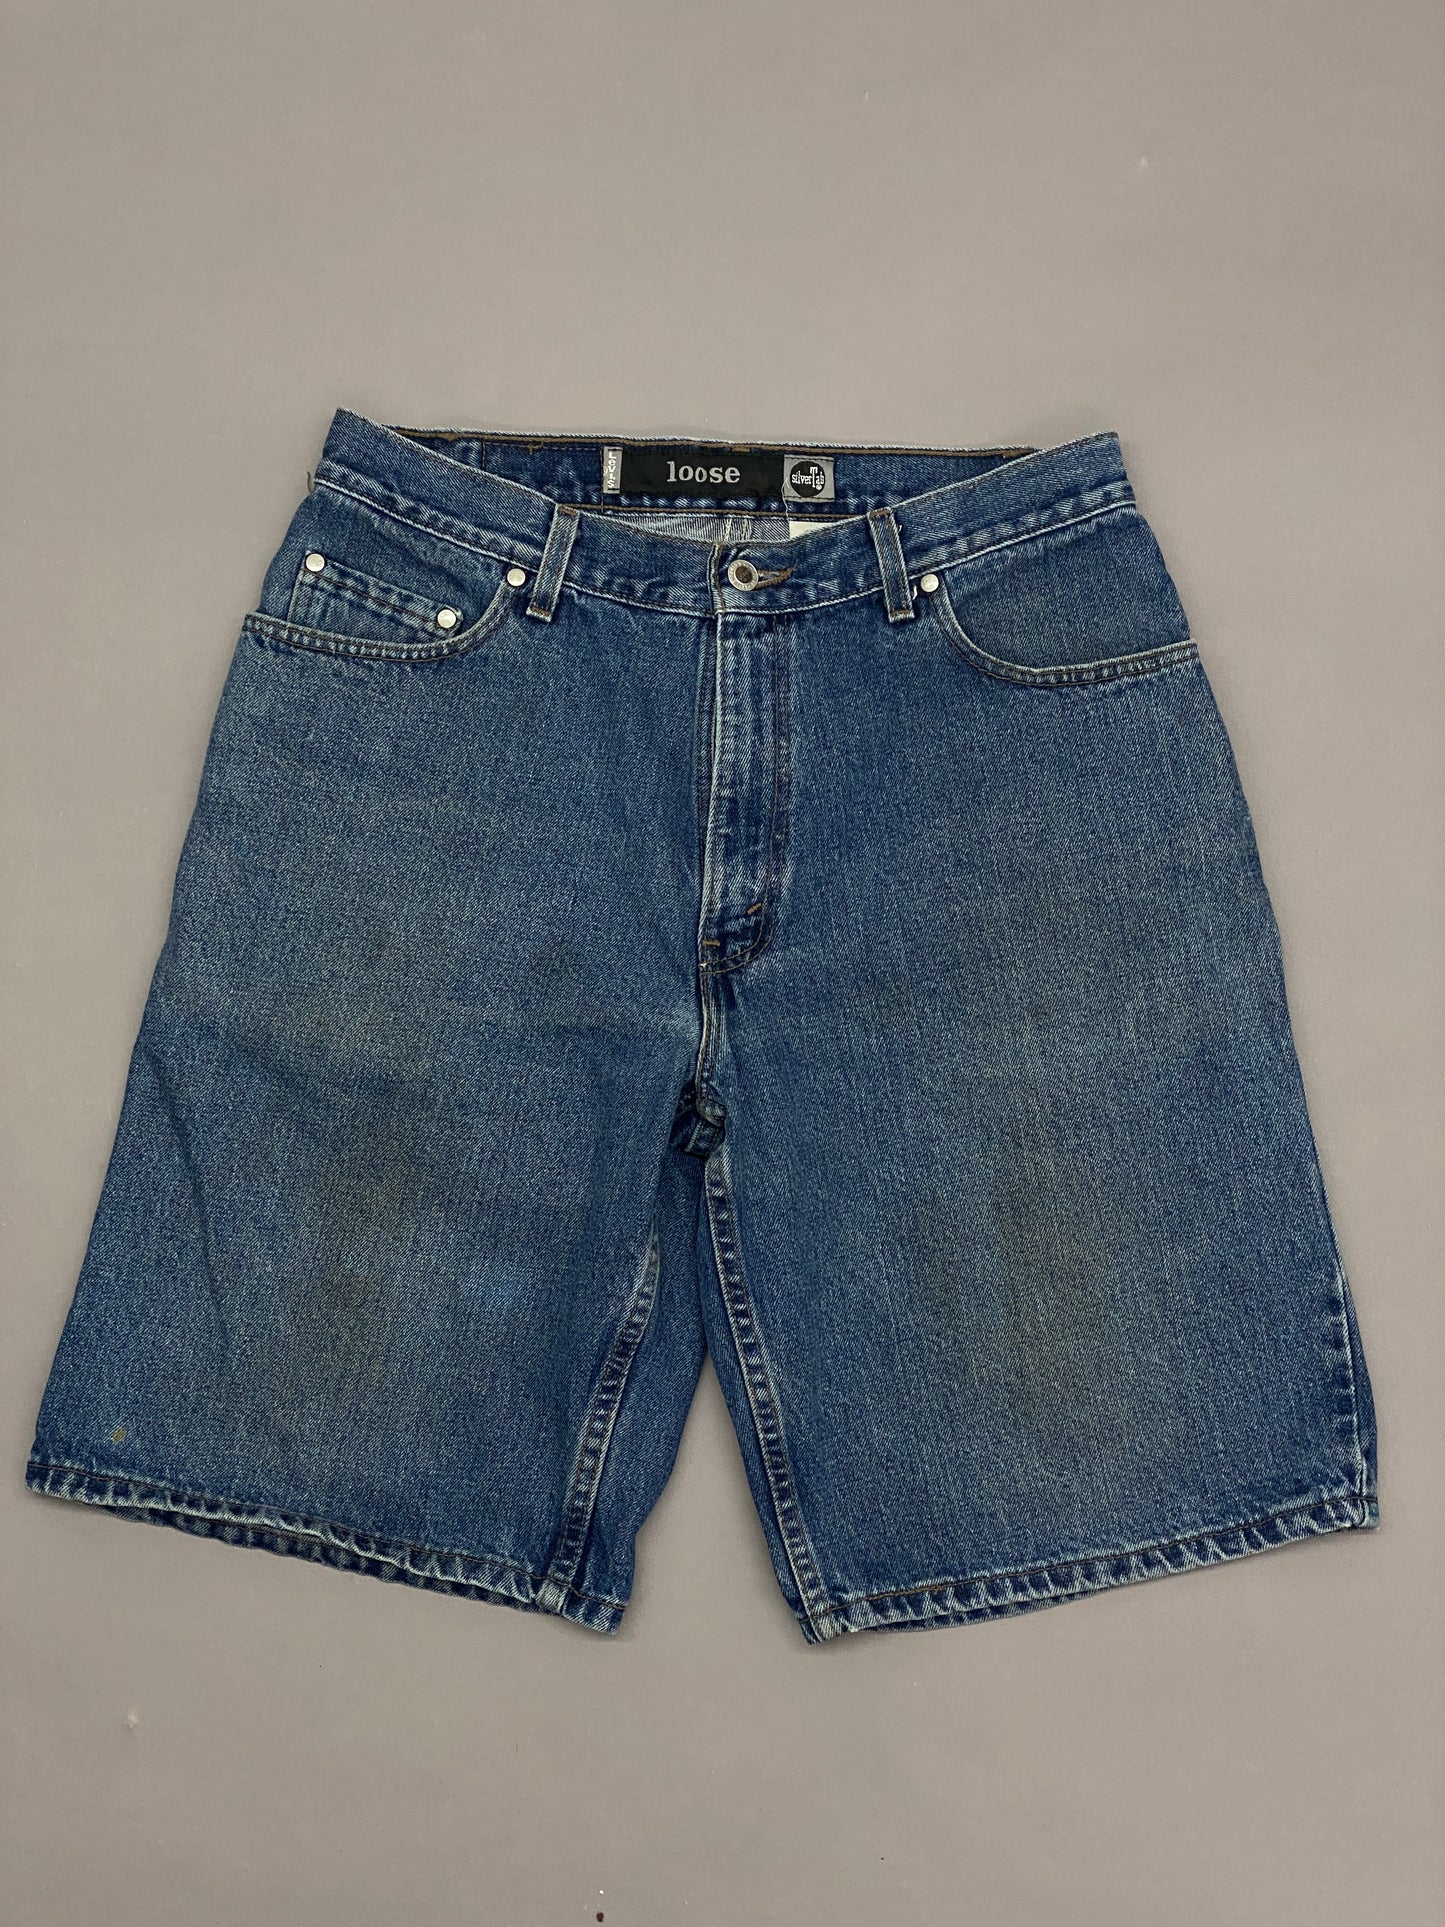 Levis Silver Tab Vintage Baggy Shorts - 33